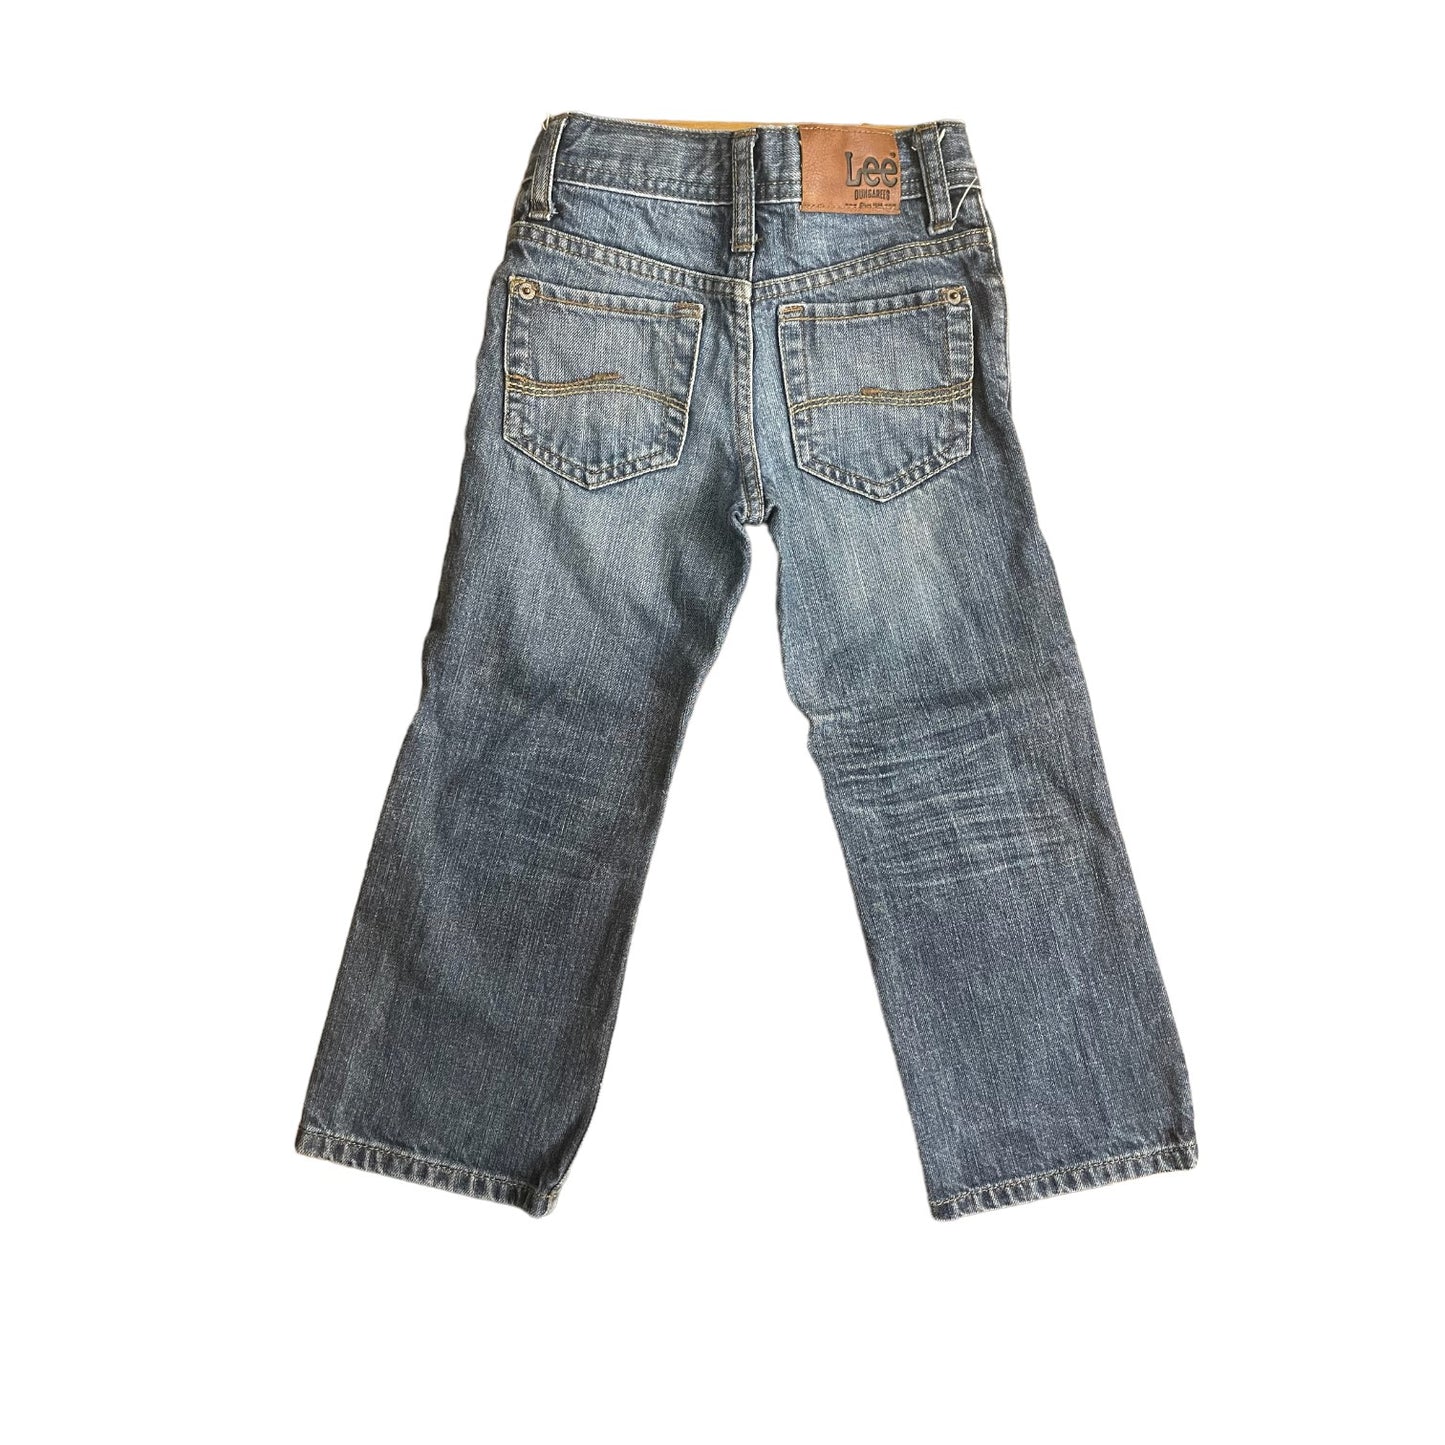 Lee Dungarees Boys Boot Cut Jeans Size 5